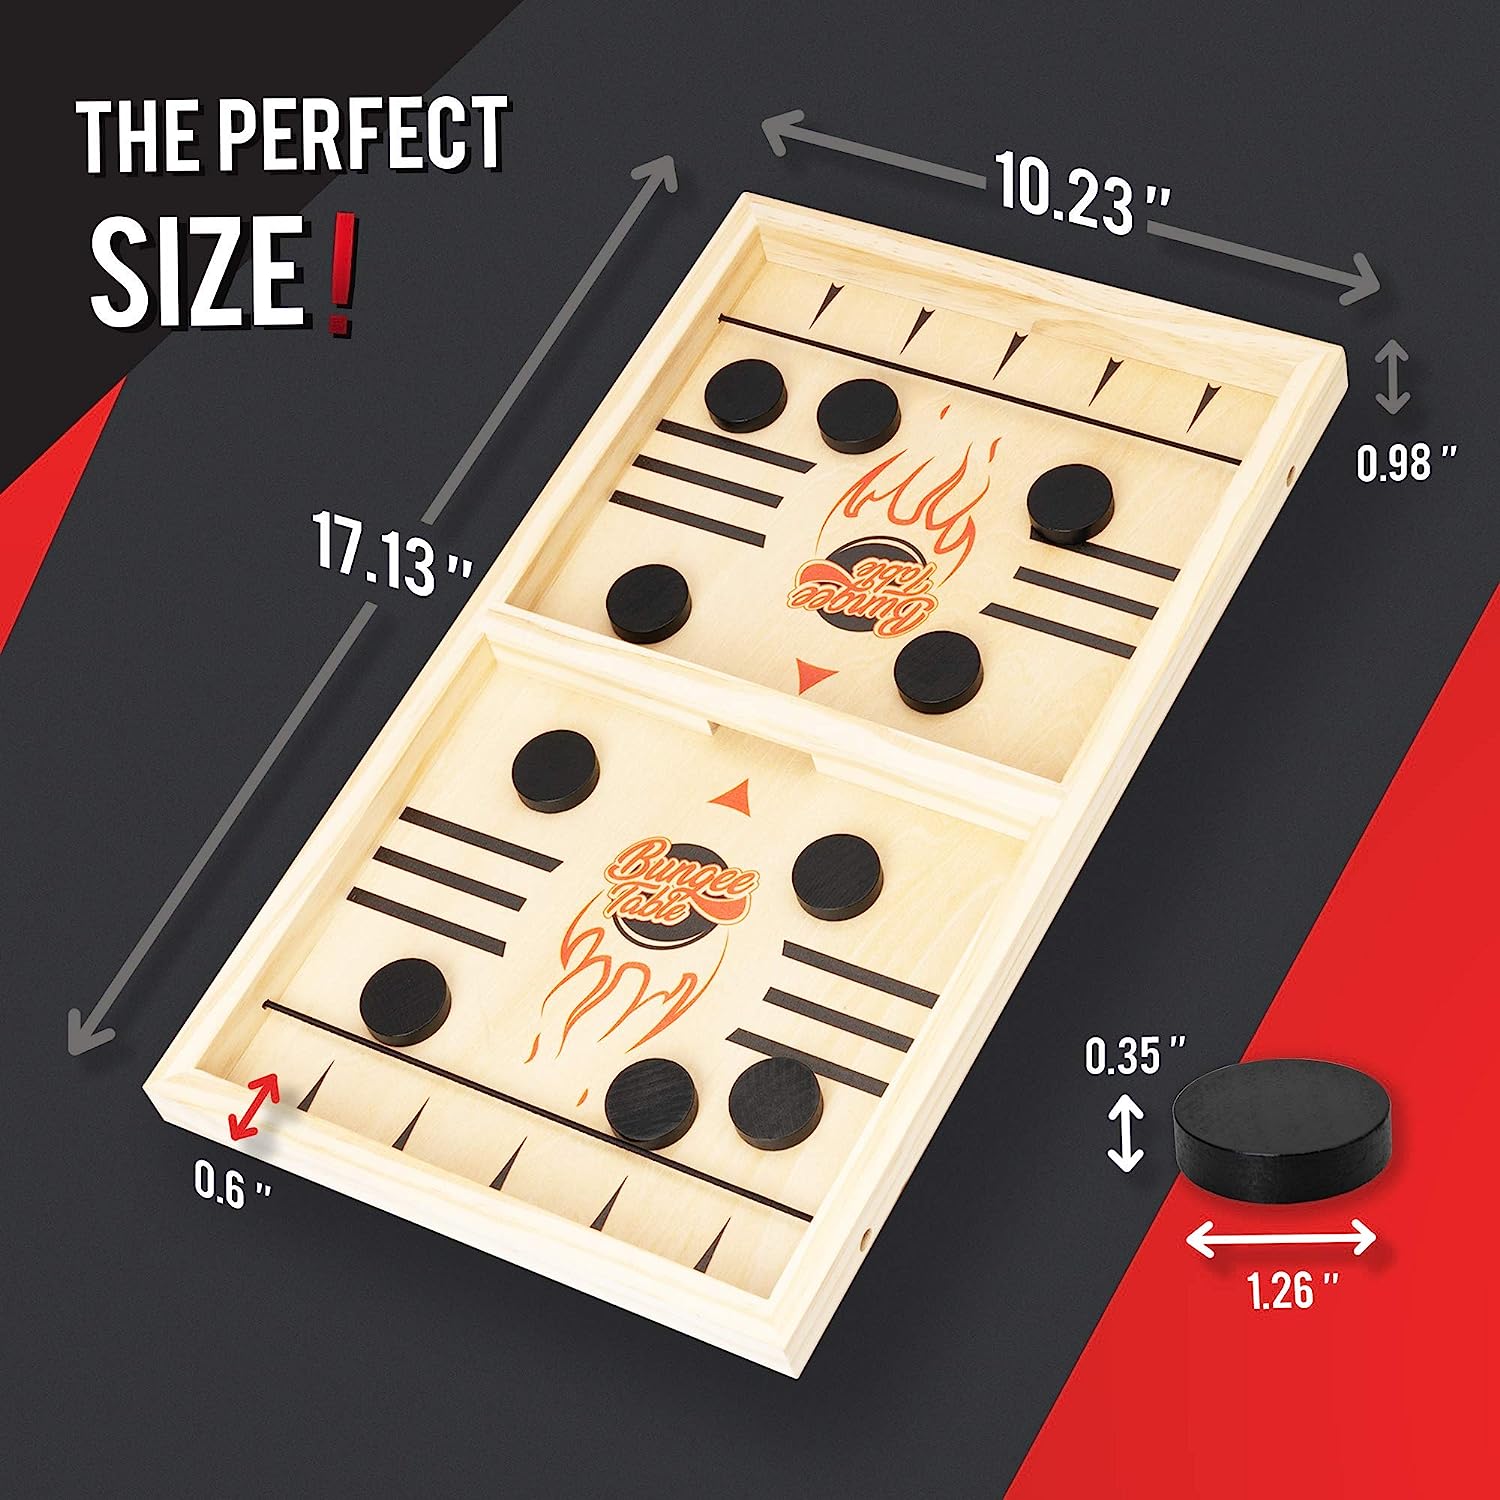 Large Fast Sling Puck Game - Fast-Paced Fun for a Family Game Night or for a Party with Friends - Test Your Speed and Accuracy with This Wooden Hockey Board Game